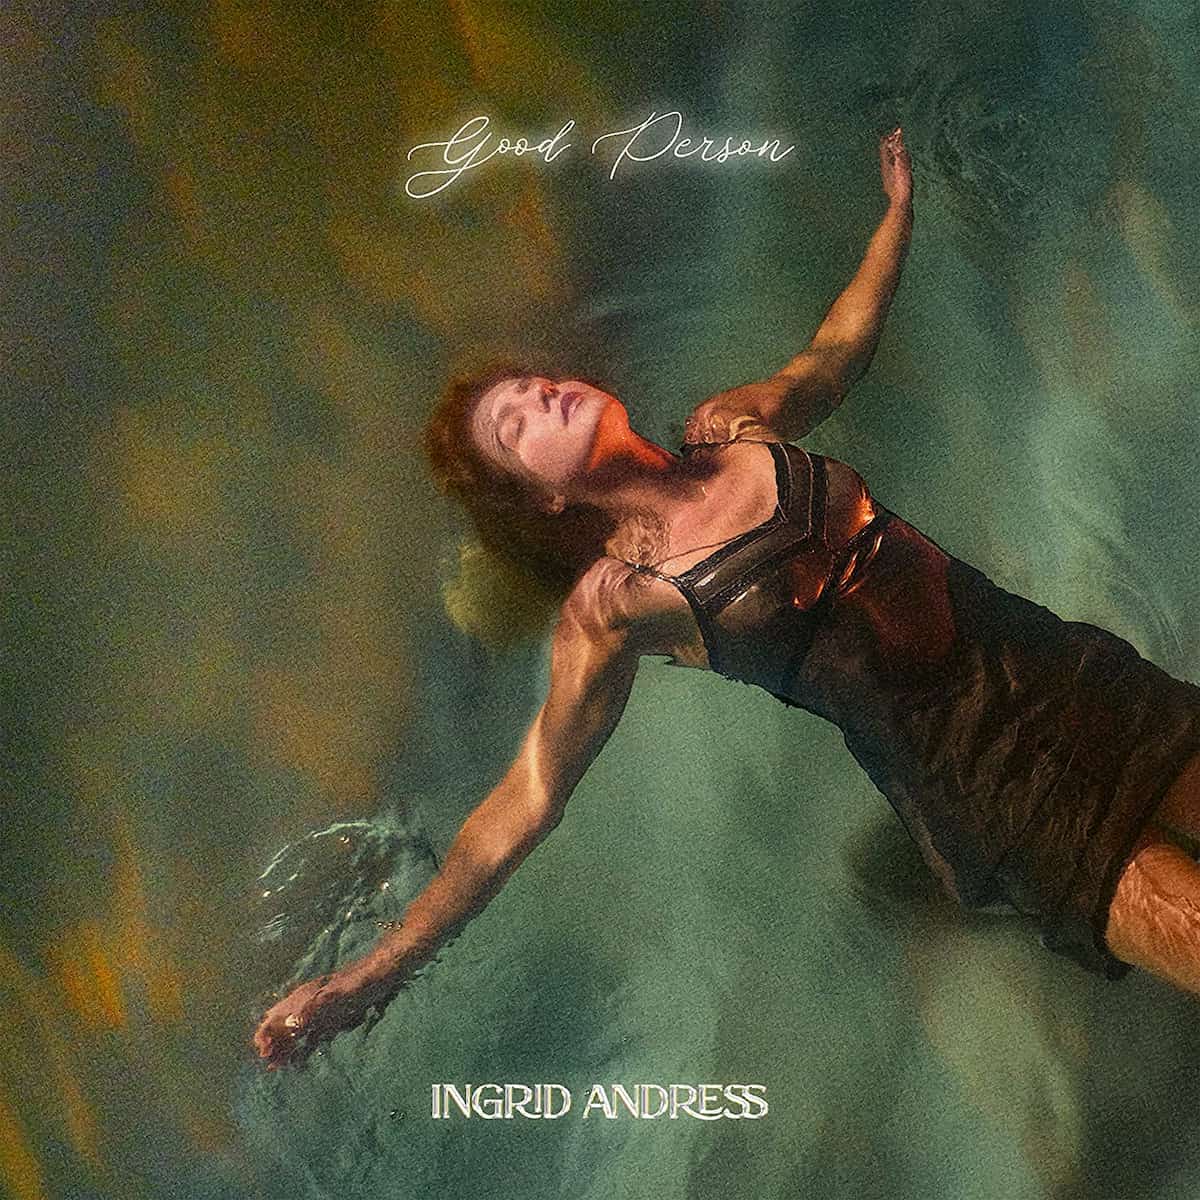 Ingrid Andress “Good Person” Album 2022, junge Country-Musik